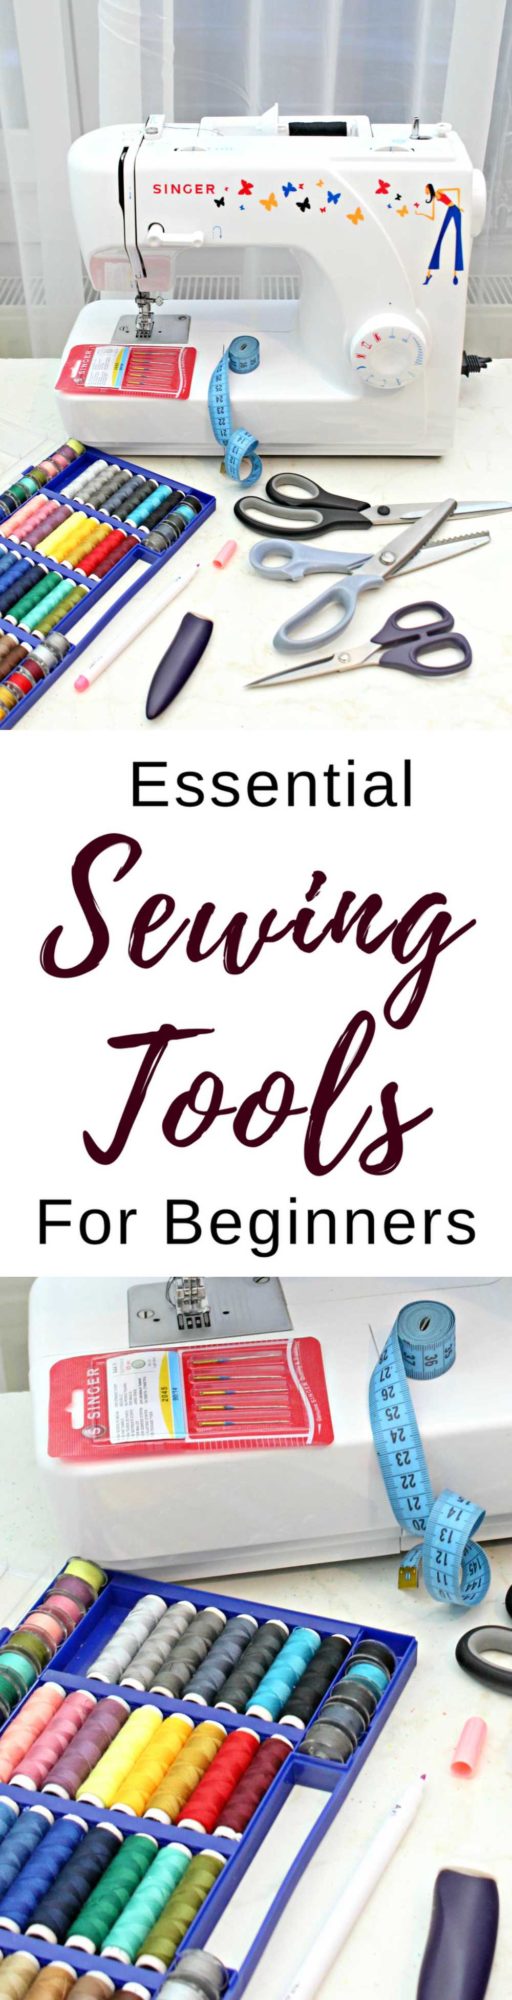 Sewing kits for beginners